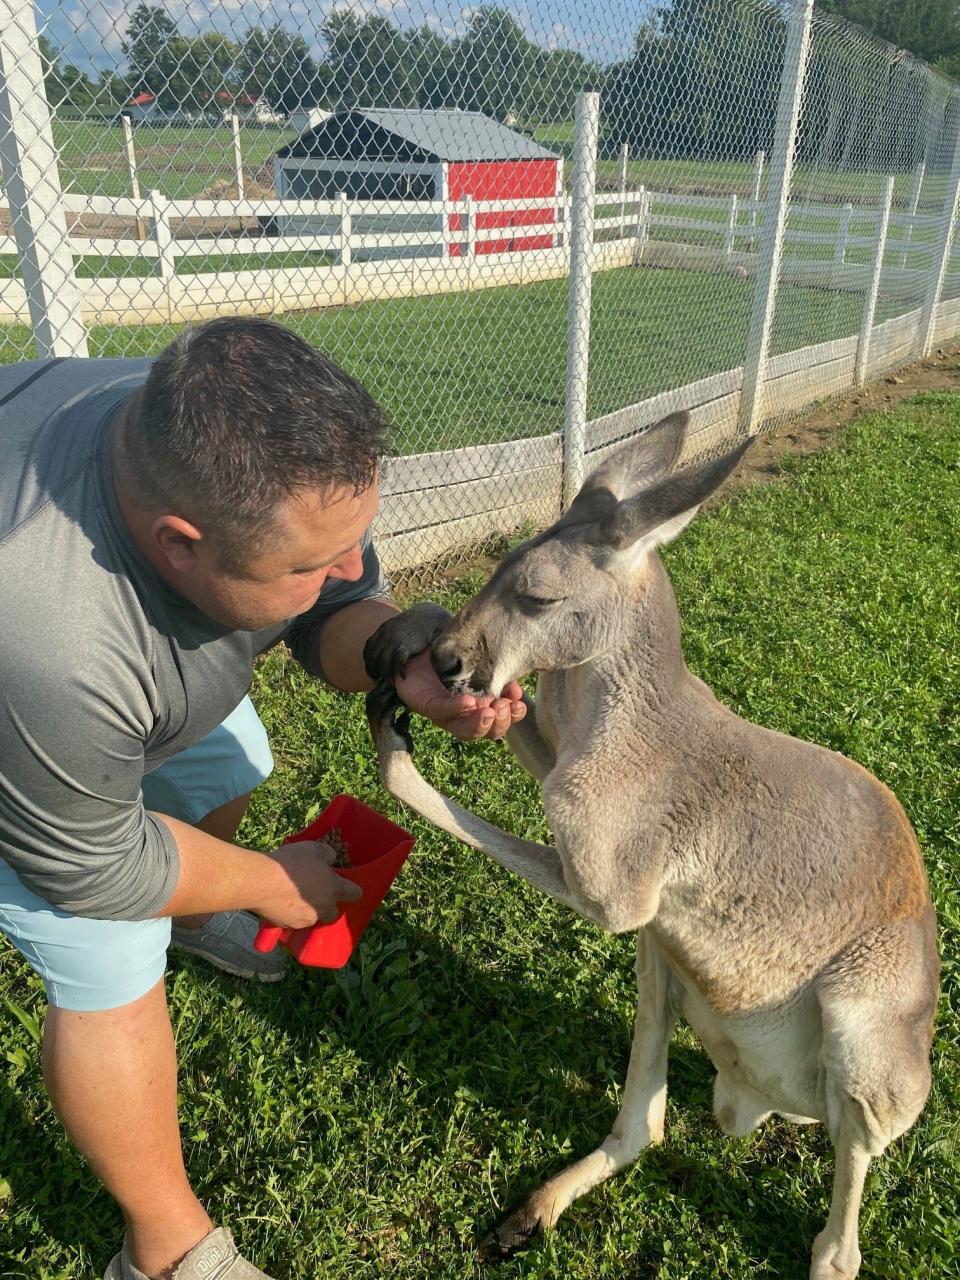 Shawn Westmeister gives Van the kangaroo a treat at he and his wife Lynn's farm, Westmeister Farm in Shelby. Numerous animals live at the 4097 Plymouth-Springmill Road farm. The 'animal encounter" is offered to visitors via private tours by booking at Westmeister.com